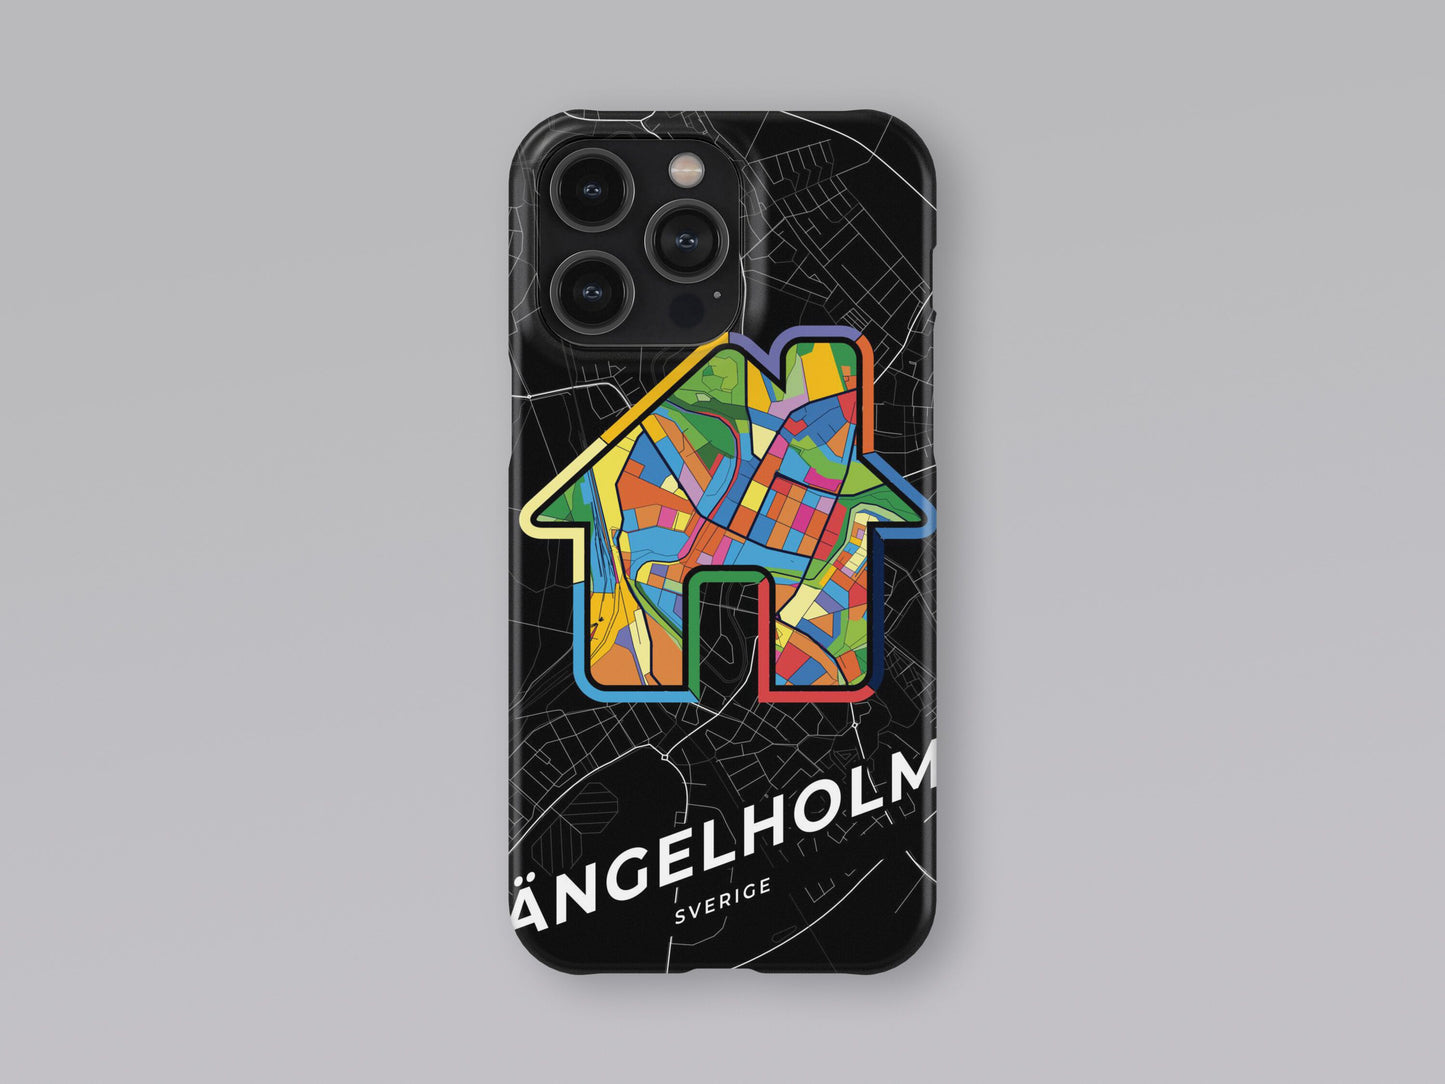 Ängelholm Sweden slim phone case with colorful icon. Birthday, wedding or housewarming gift. Couple match cases. 3